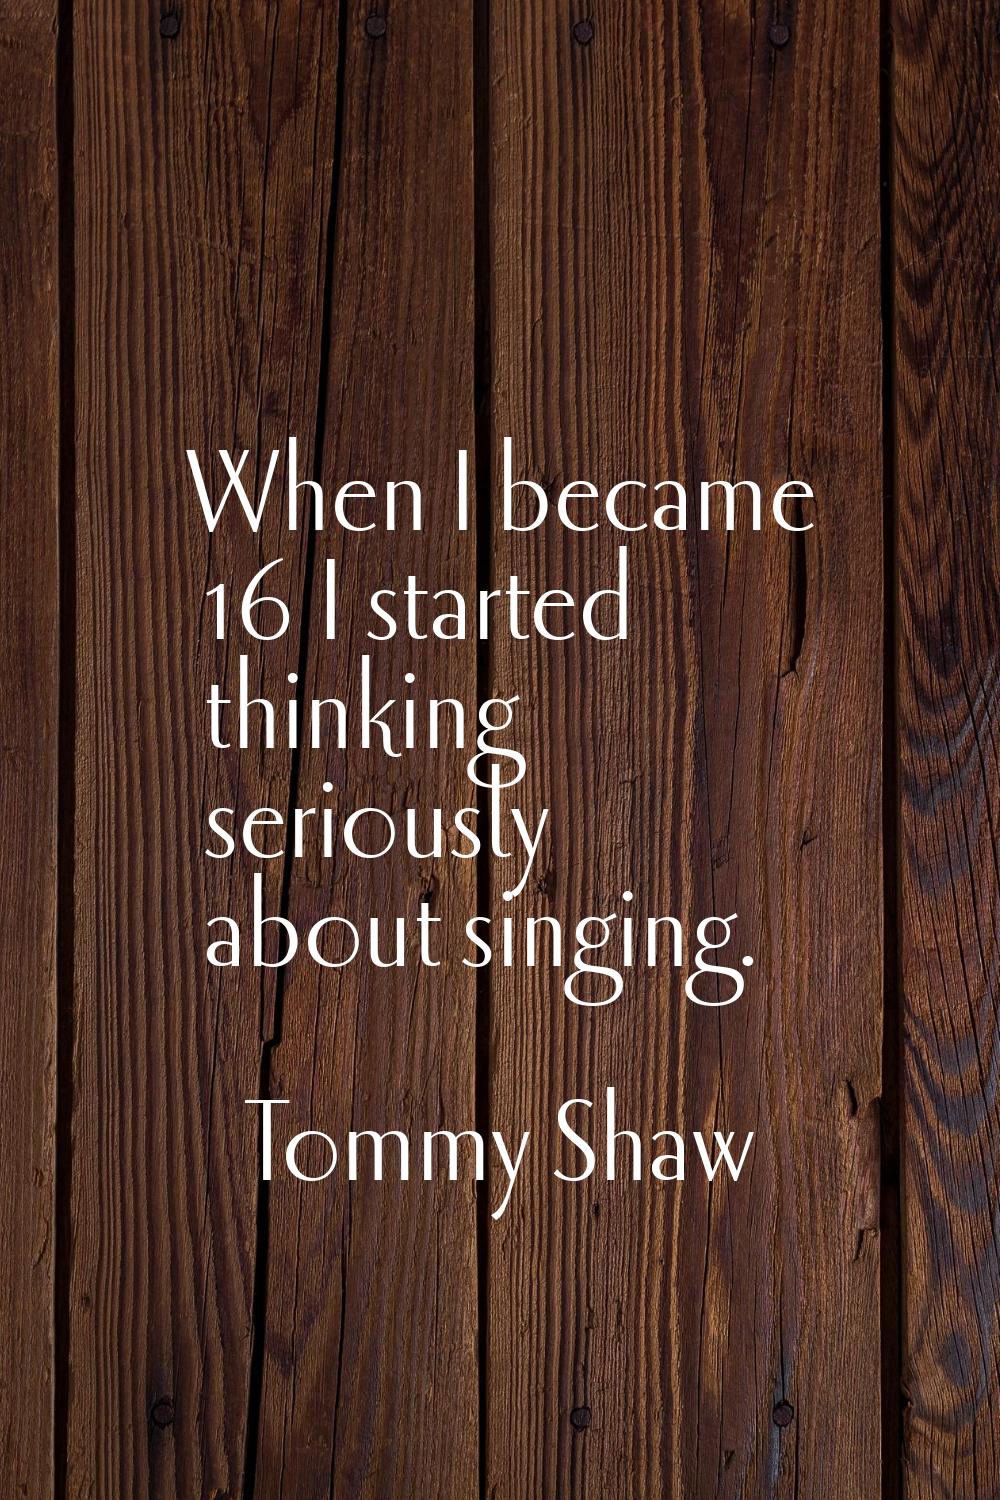 When I became 16 I started thinking seriously about singing.